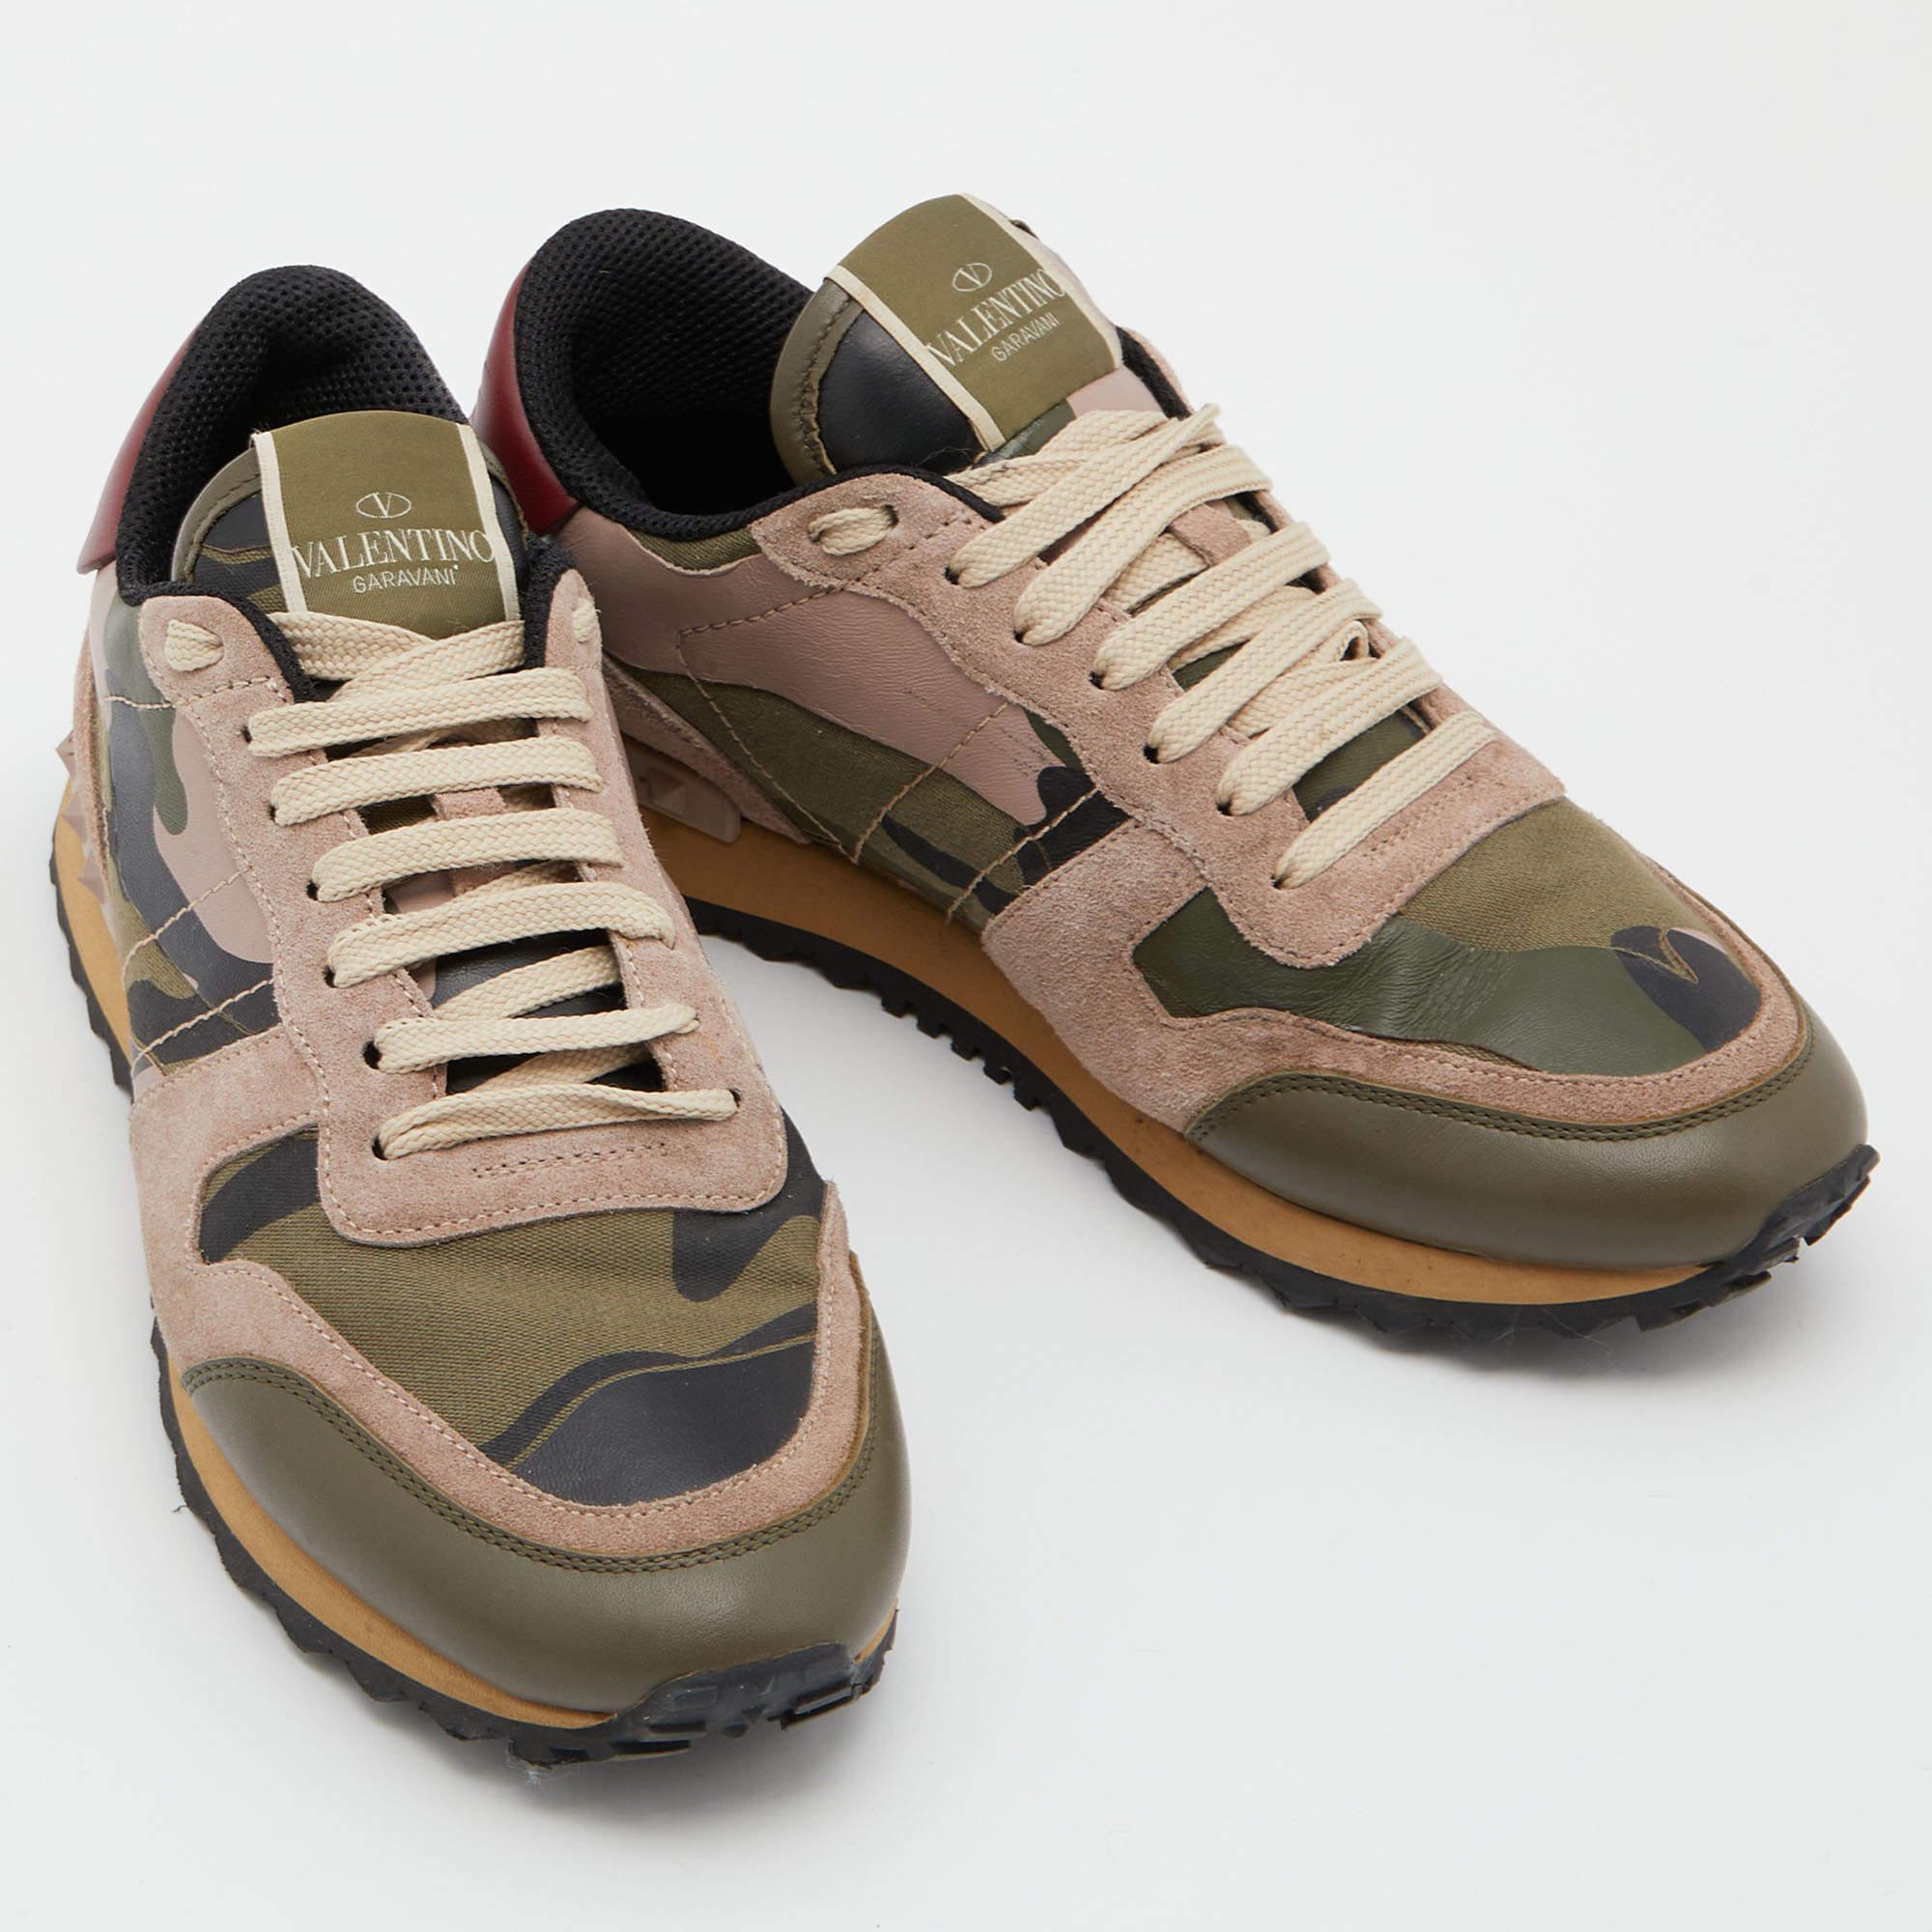 Women's Valentino Multicolor Camouflage Suede Canvas Leather Rockrunner Low Top Sneakers